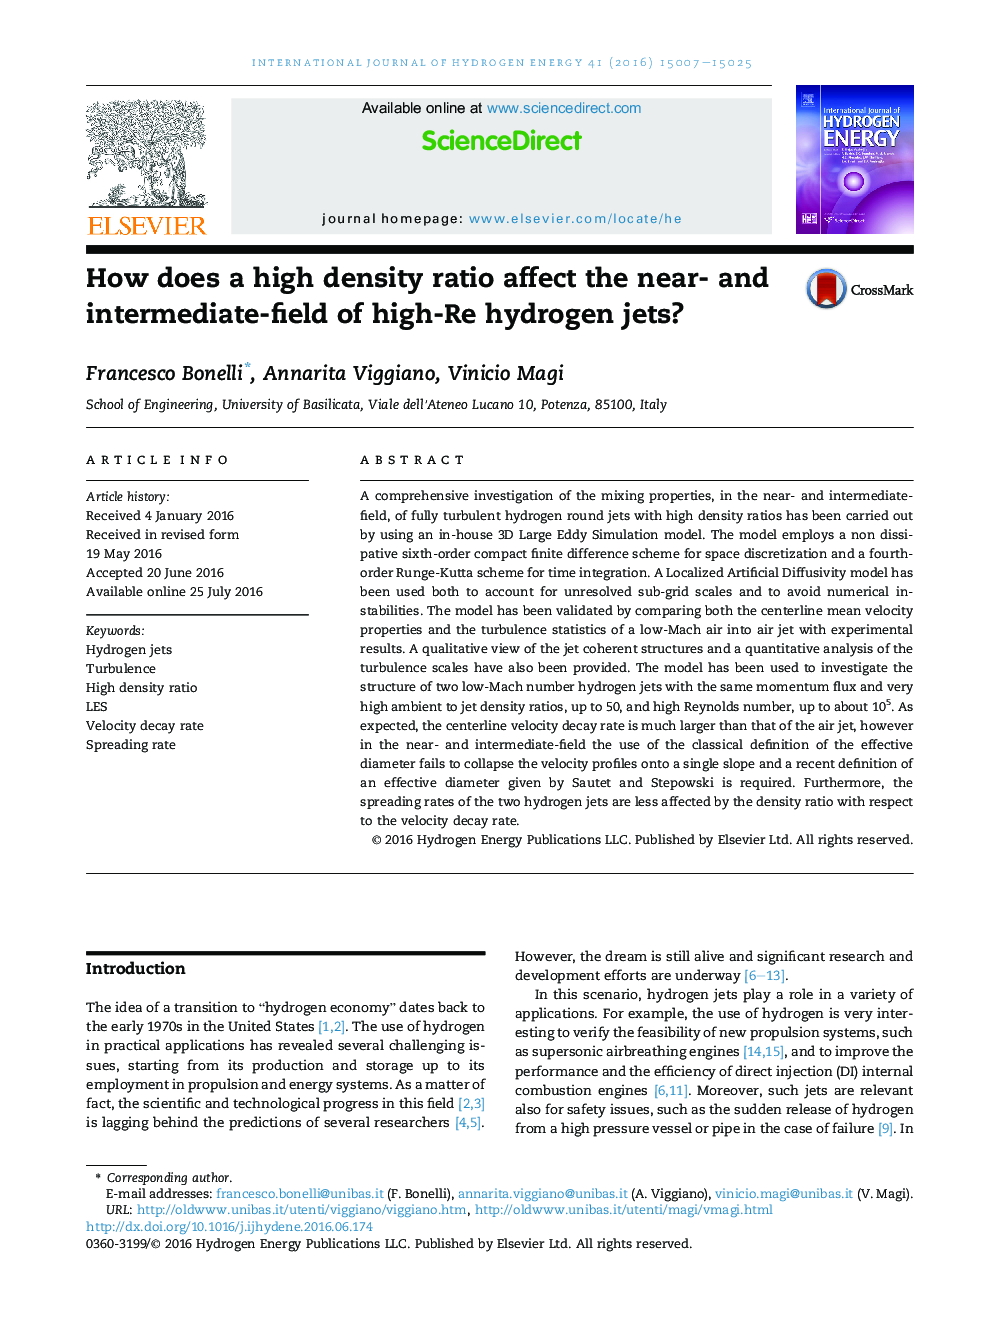 How does a high density ratio affect the near- and intermediate-field of high-Re hydrogen jets?